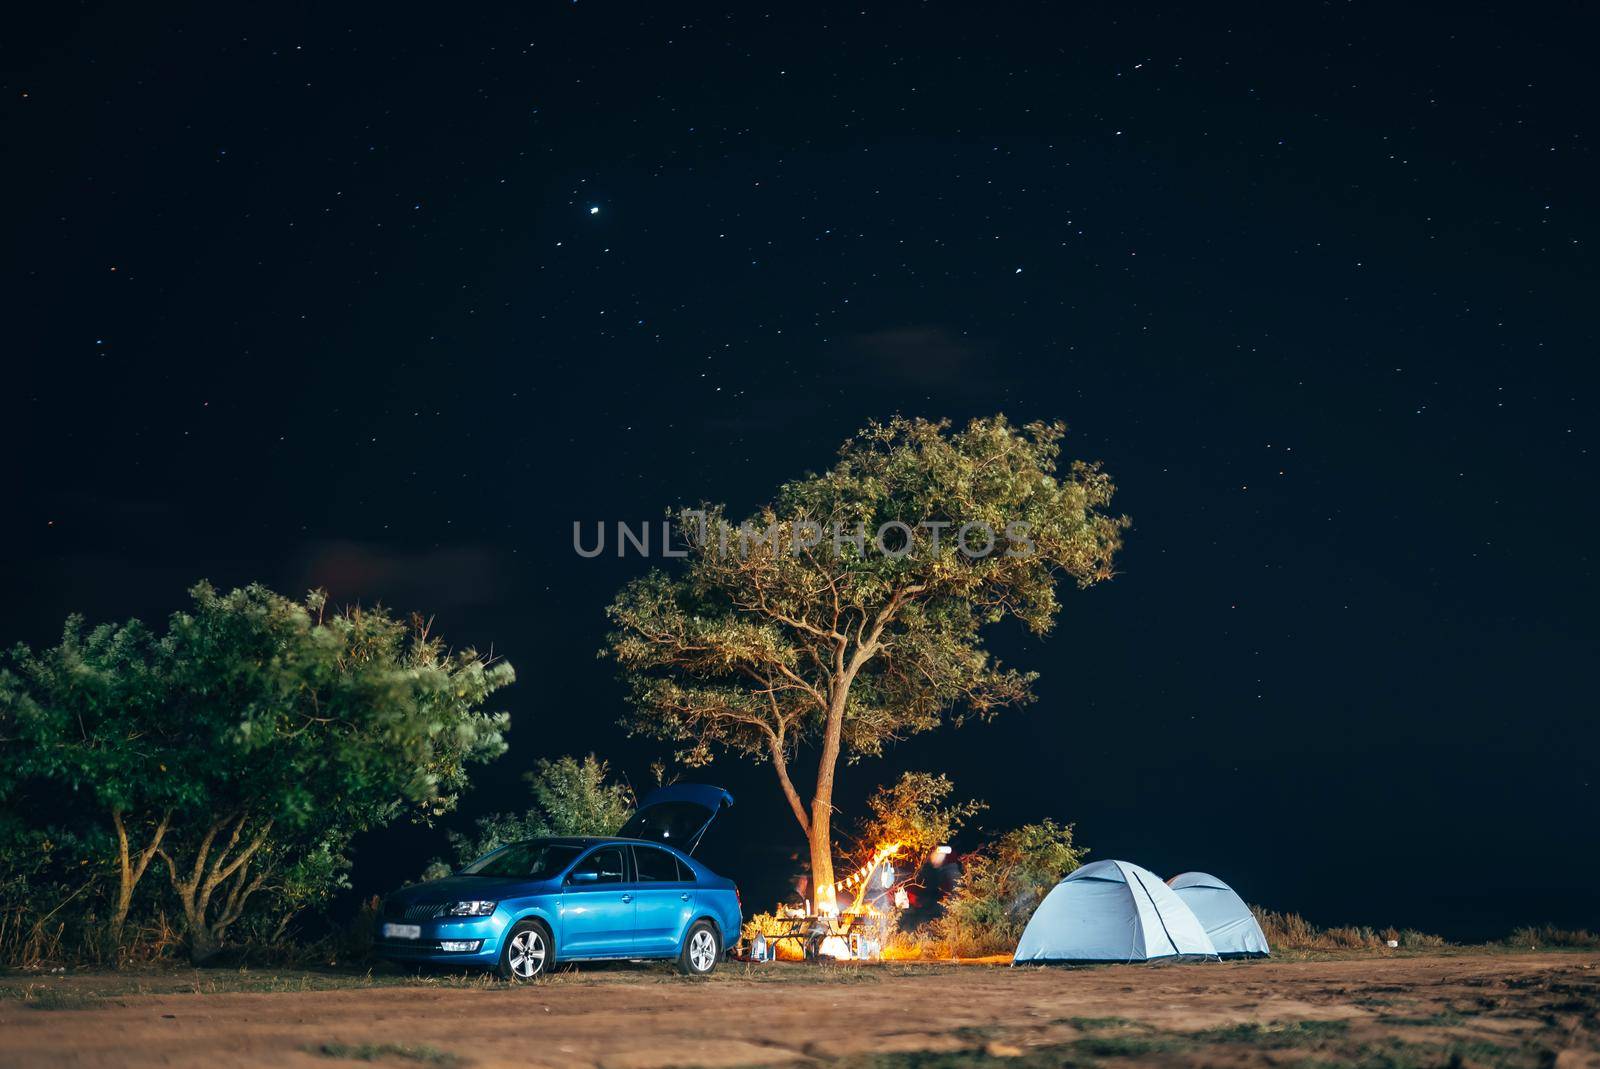 Group of five travellers rest on sea shore under tree on blue evening sky background. Tourism and camping concept.